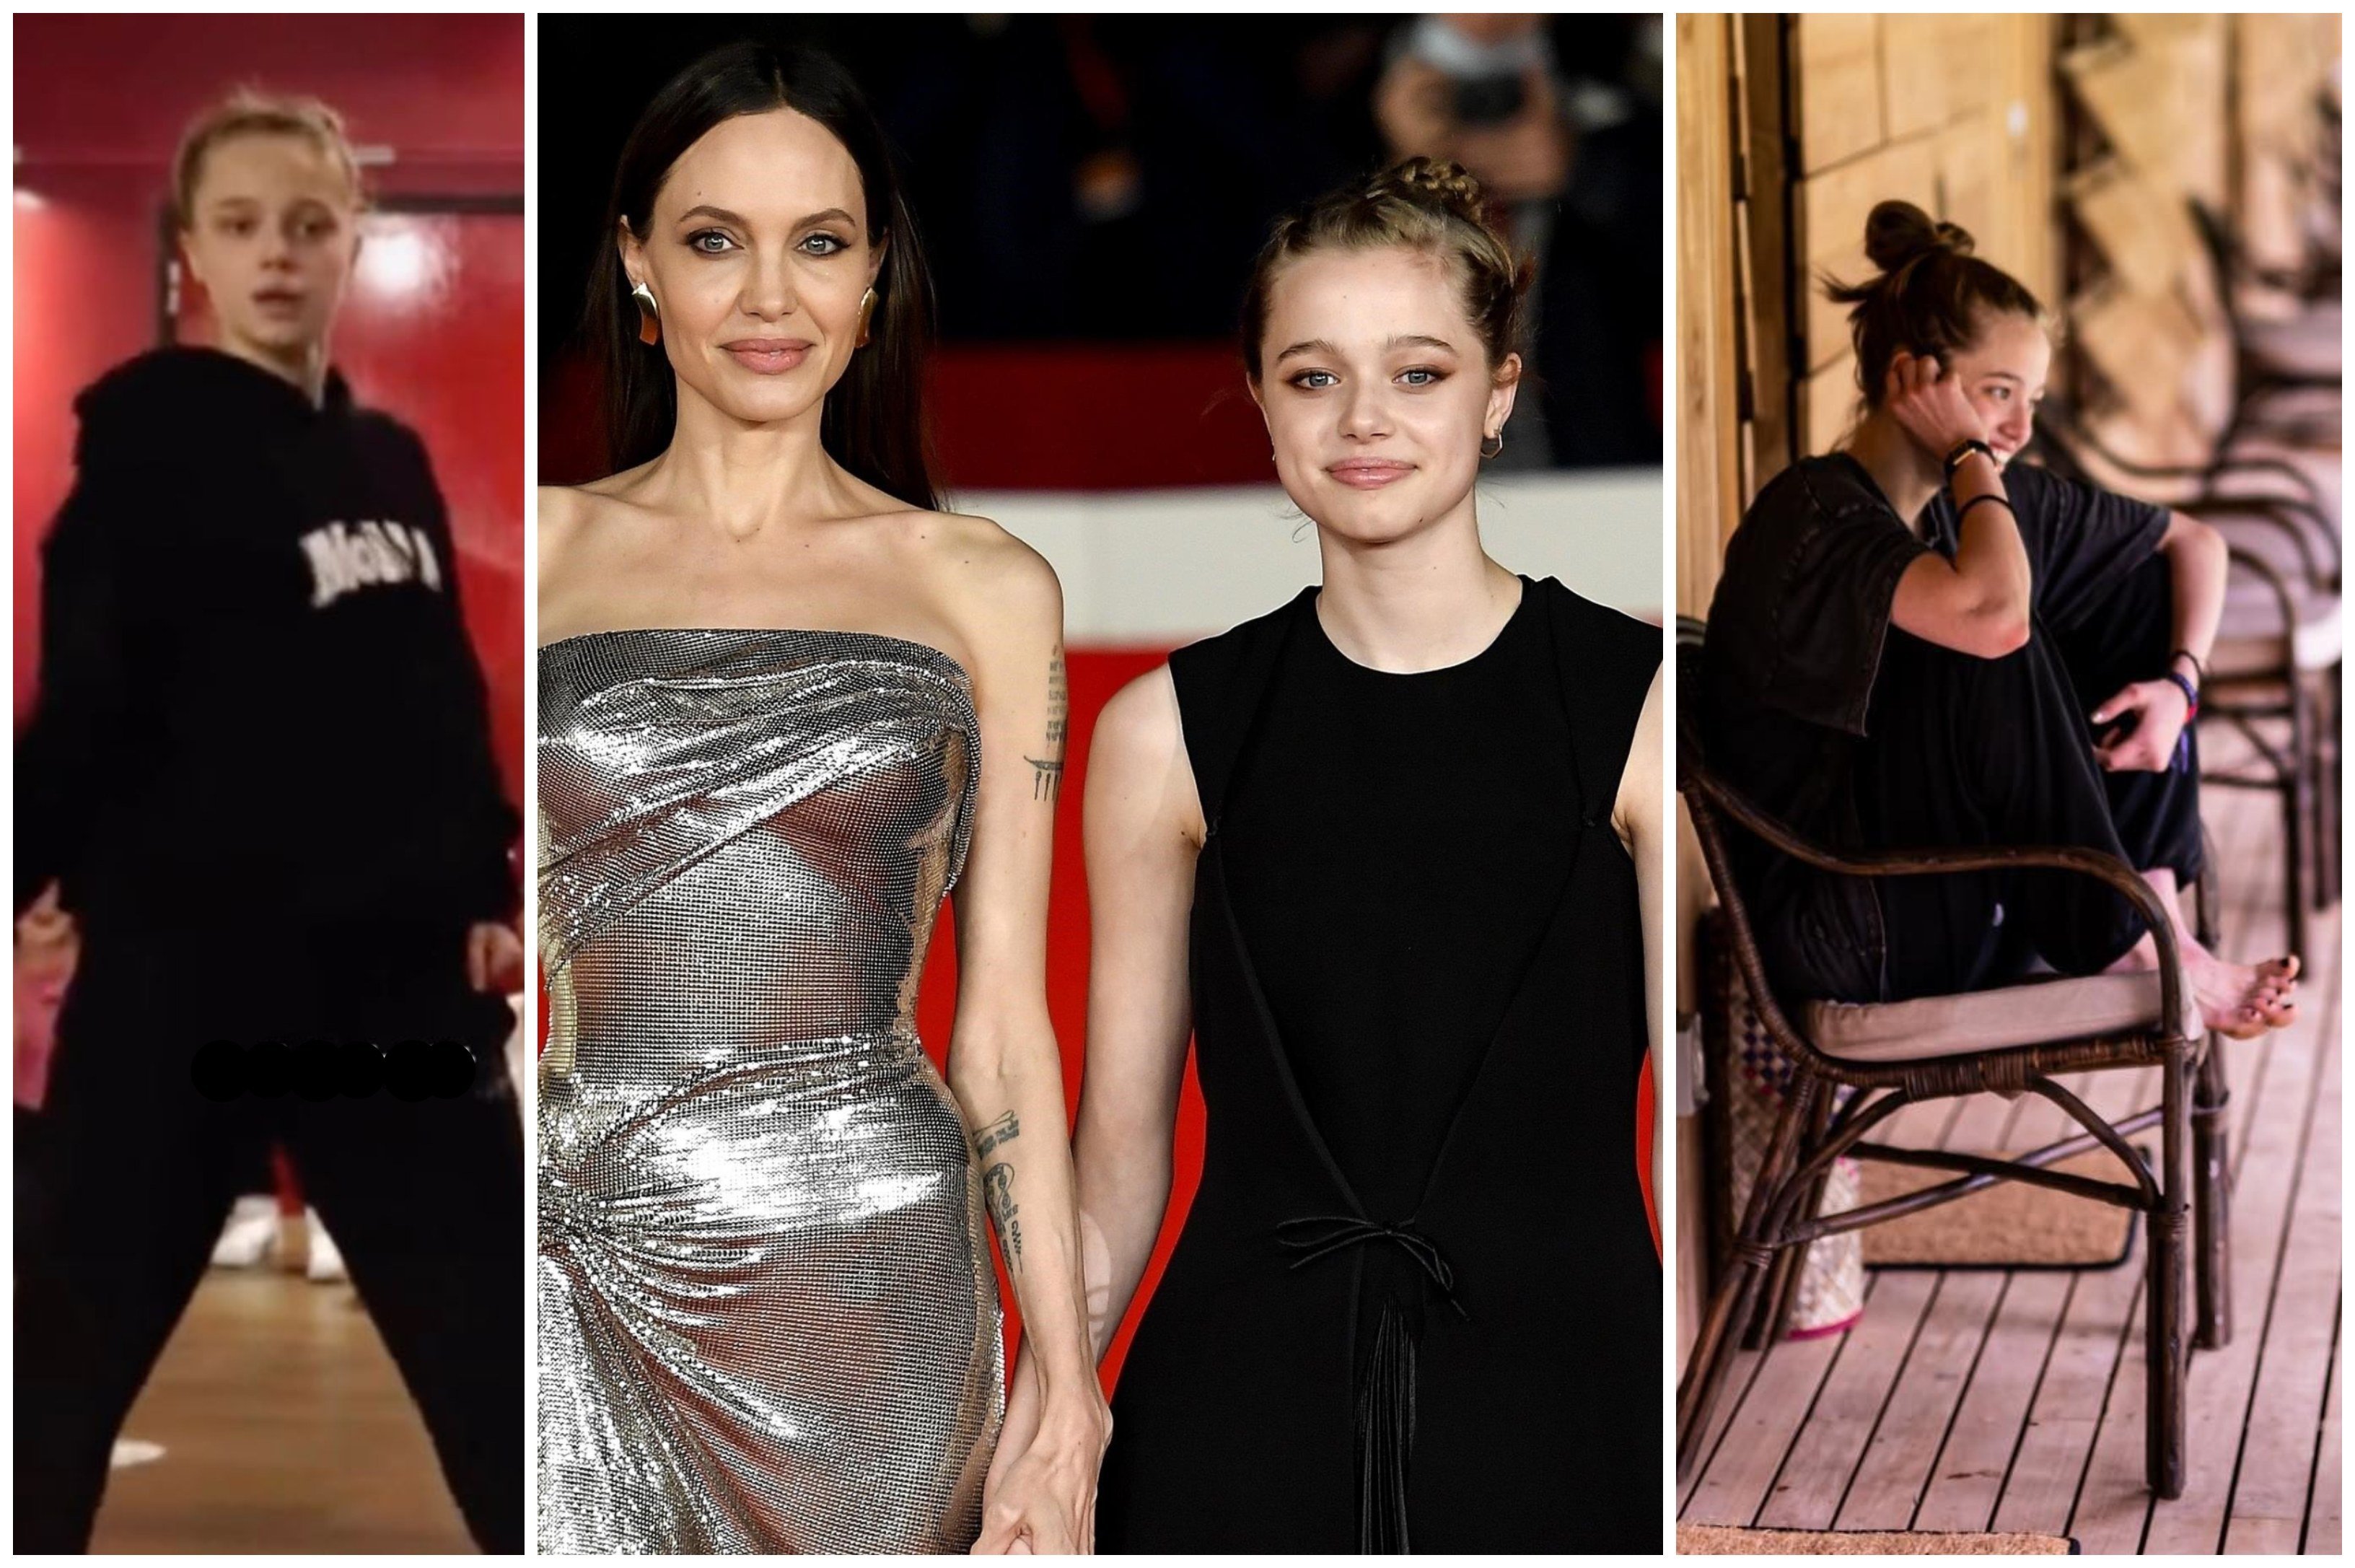 Shiloh Jolie-Pitt, Angelina and Brad’s first biological daughter together, is celebrating her 16th birthday. Photos: Getty, YouTube, @angelinajolie/Instagram